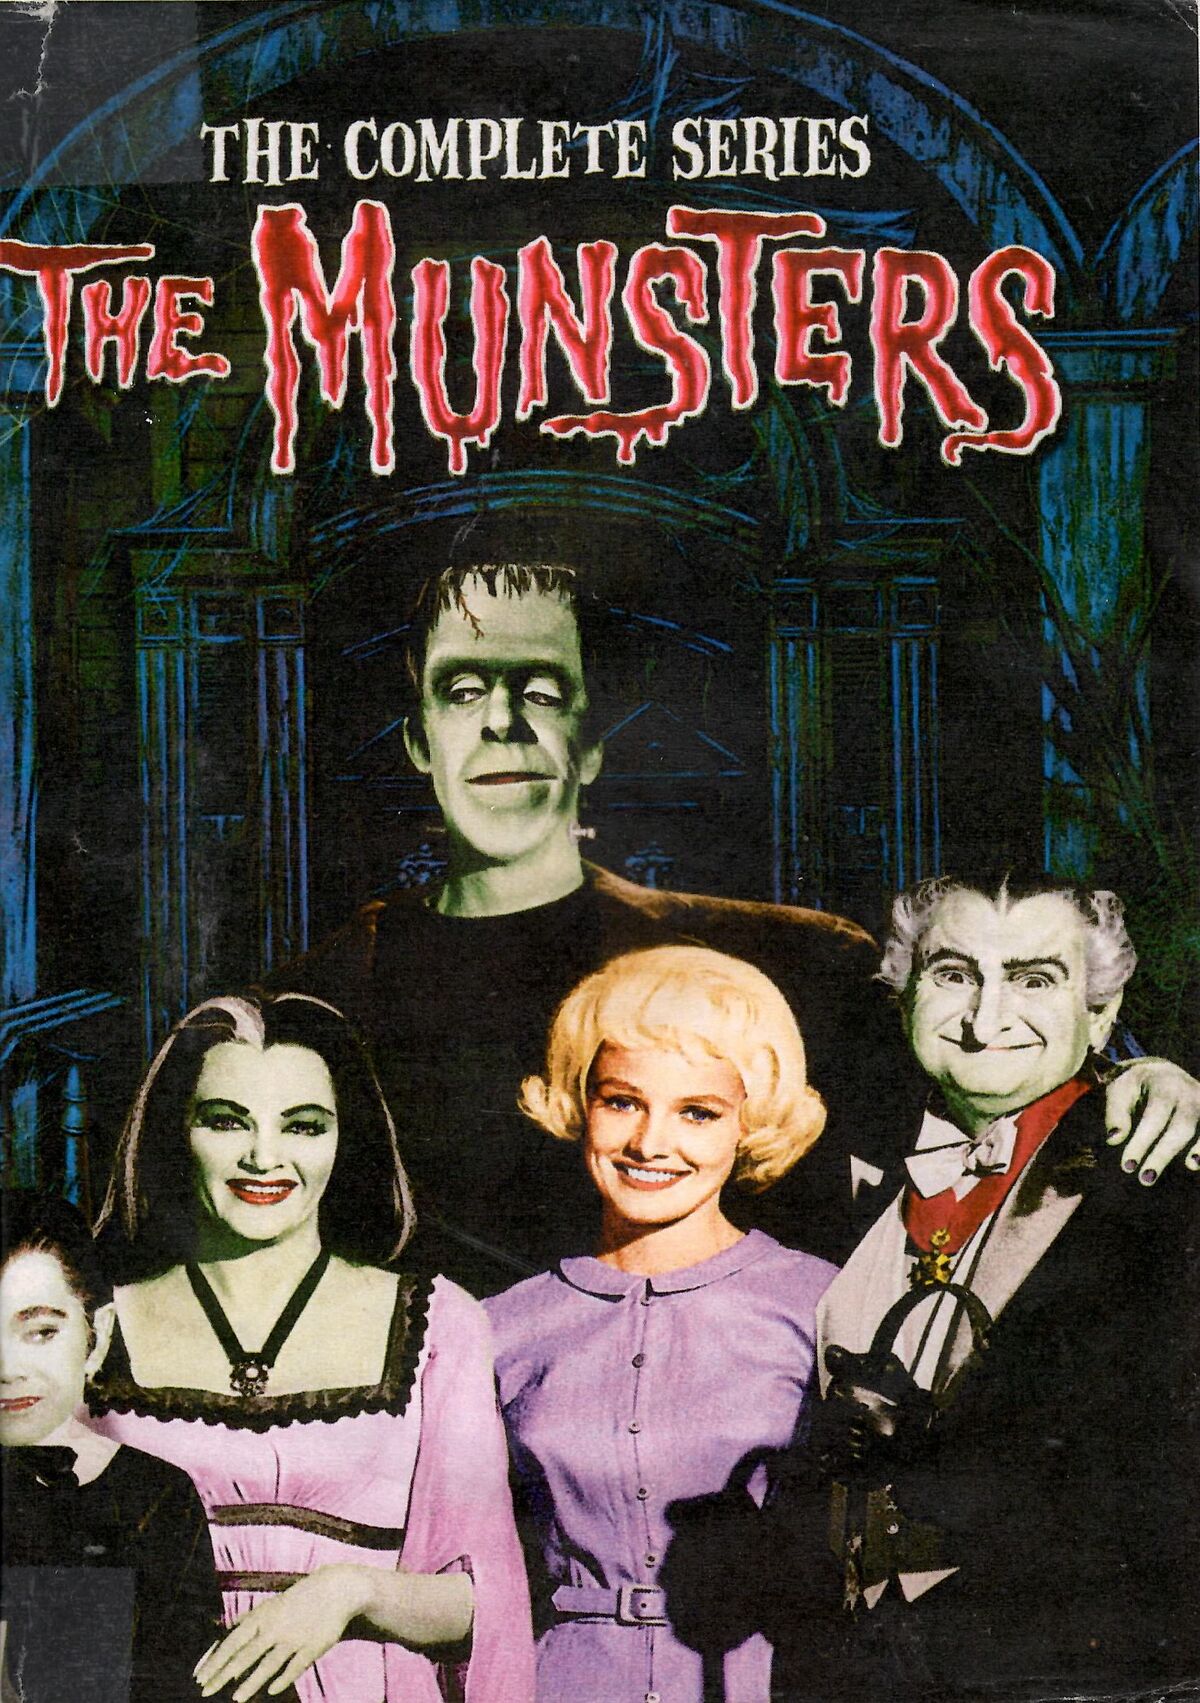 The Munsters: The Complete Series | DVD Database | Fandom